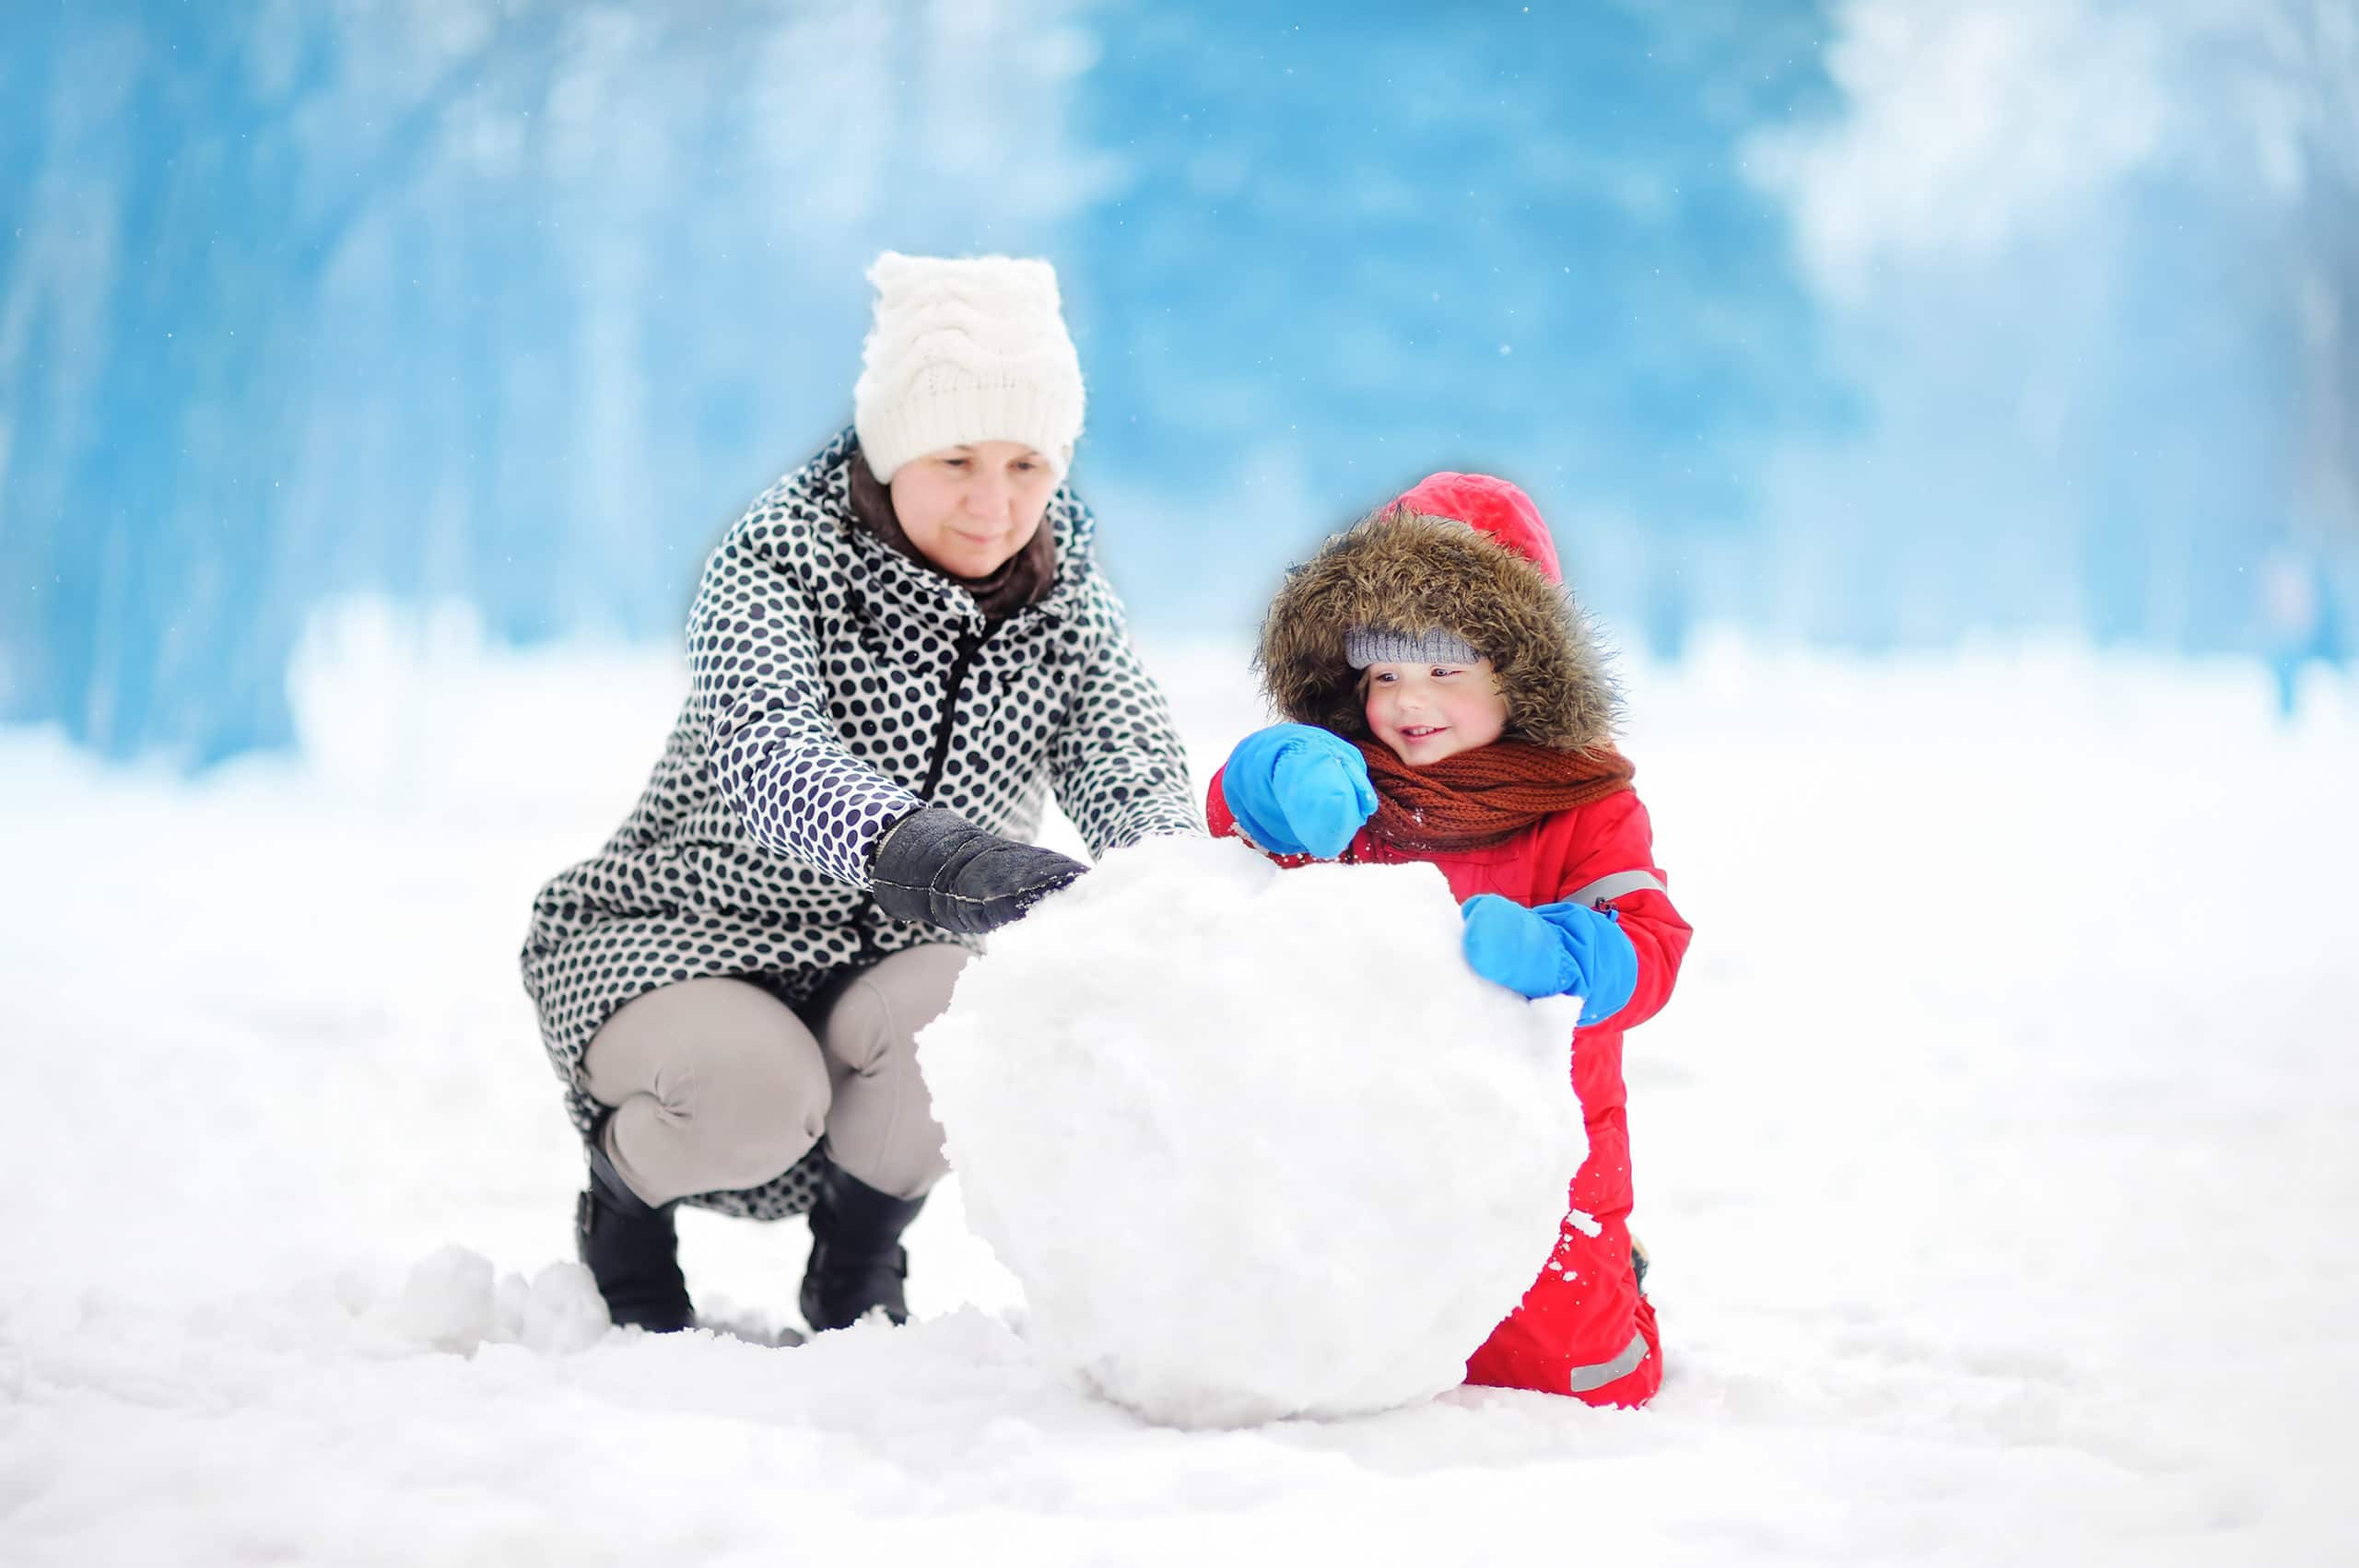 Child building a snowman with female adult